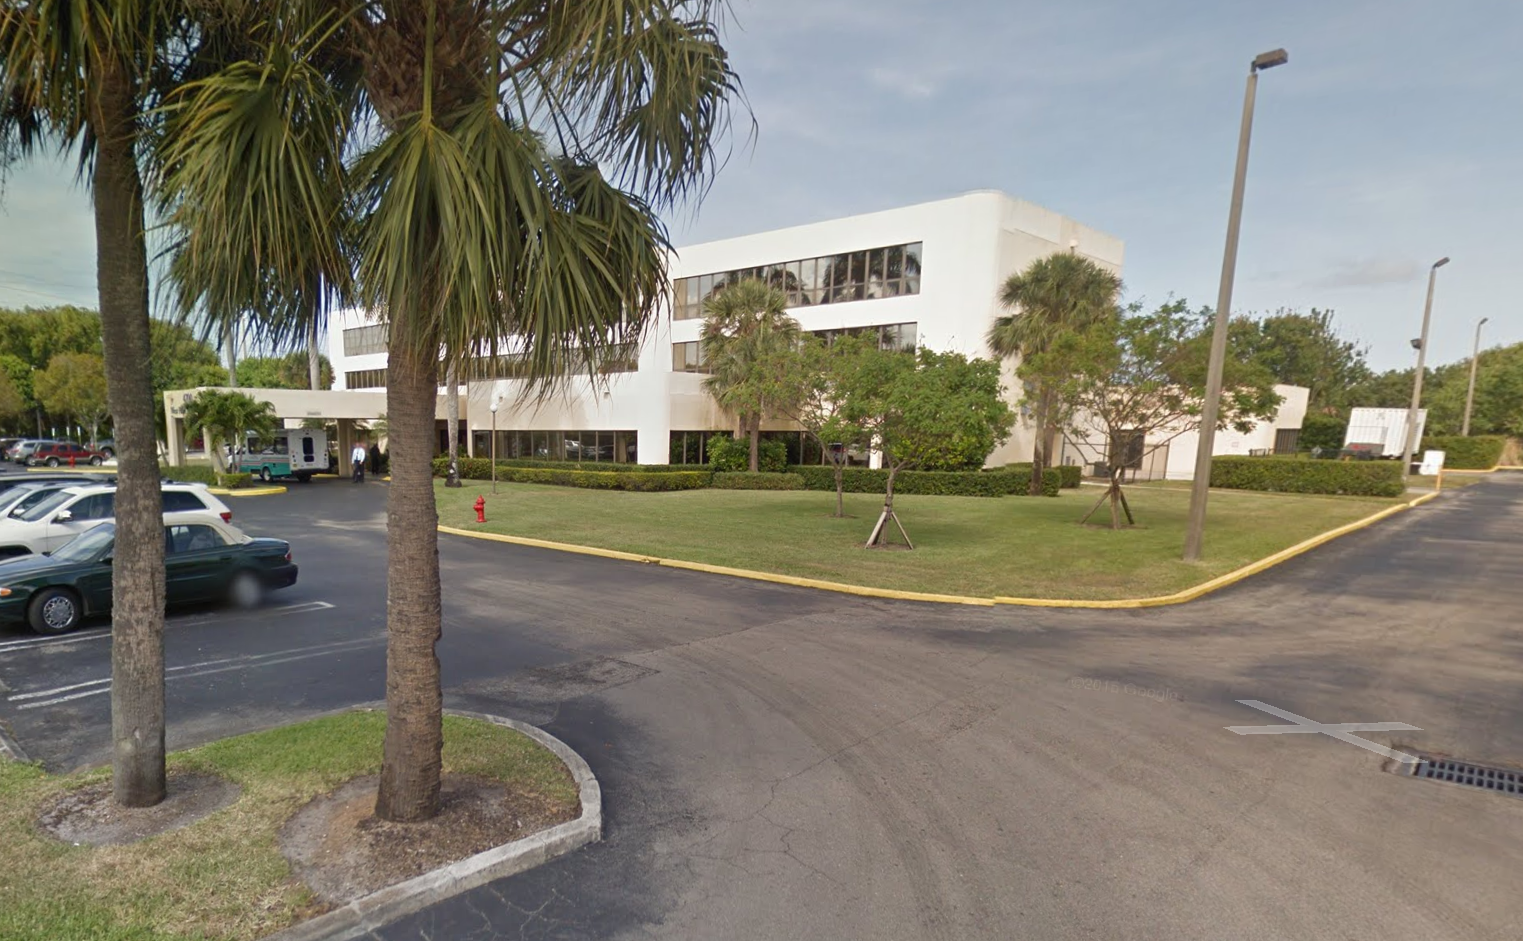 The teenager opened up a clinic in this building in West Palm Beach, FL.